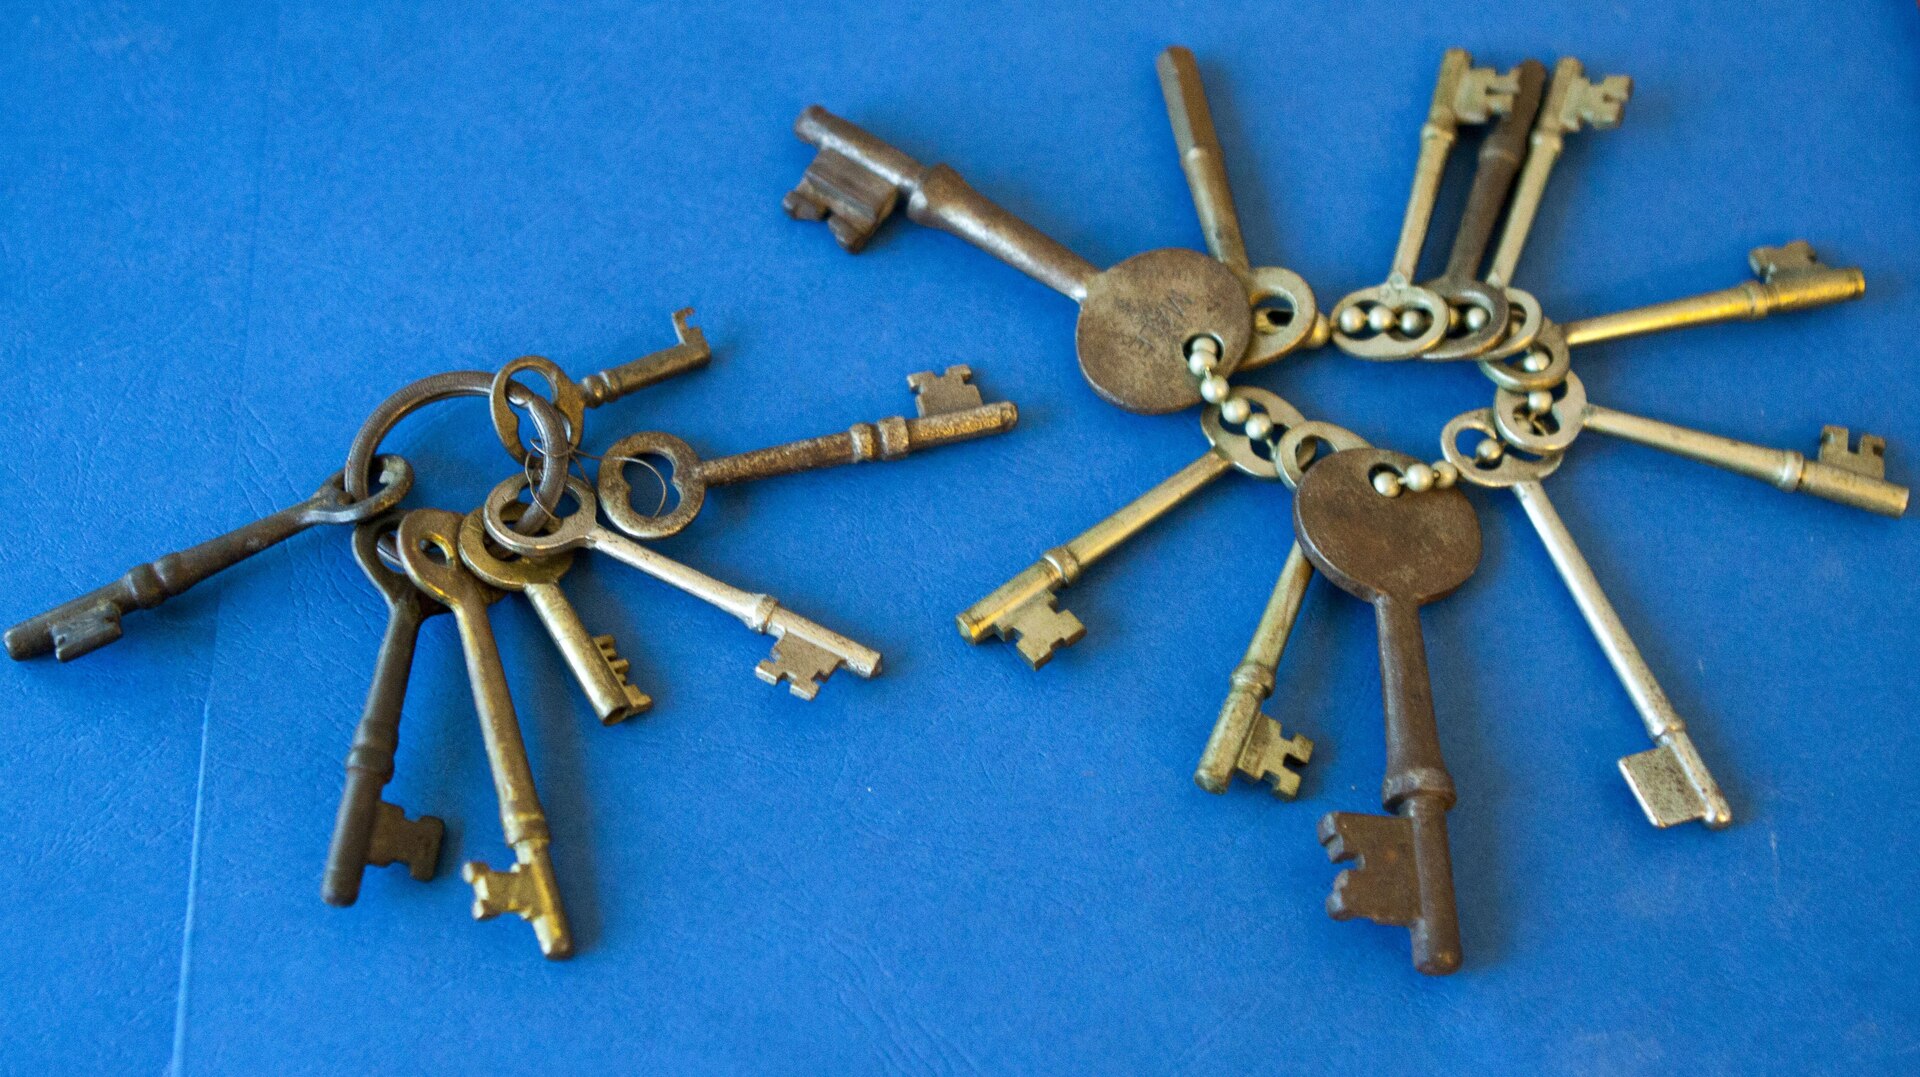 Original skeleton keys from the World War II Prisoner of War camp located at New Cumberland Army Depot in the 1940’s.  